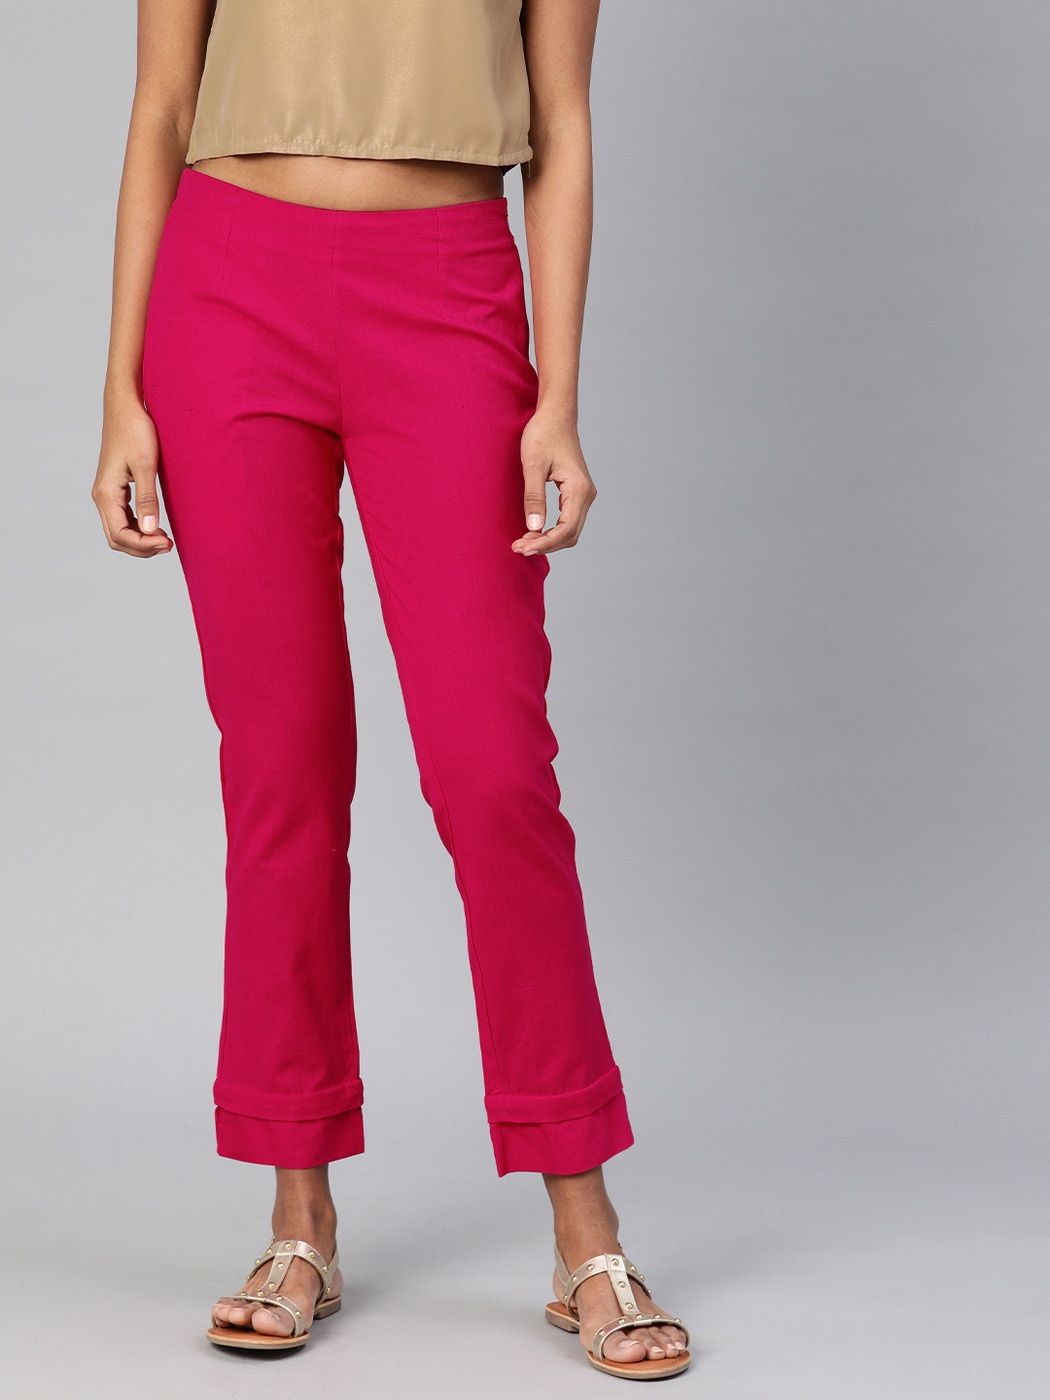 Buy Magenta Pink Ankle Pant Cotton Silk for Best Price Reviews Free  Shipping